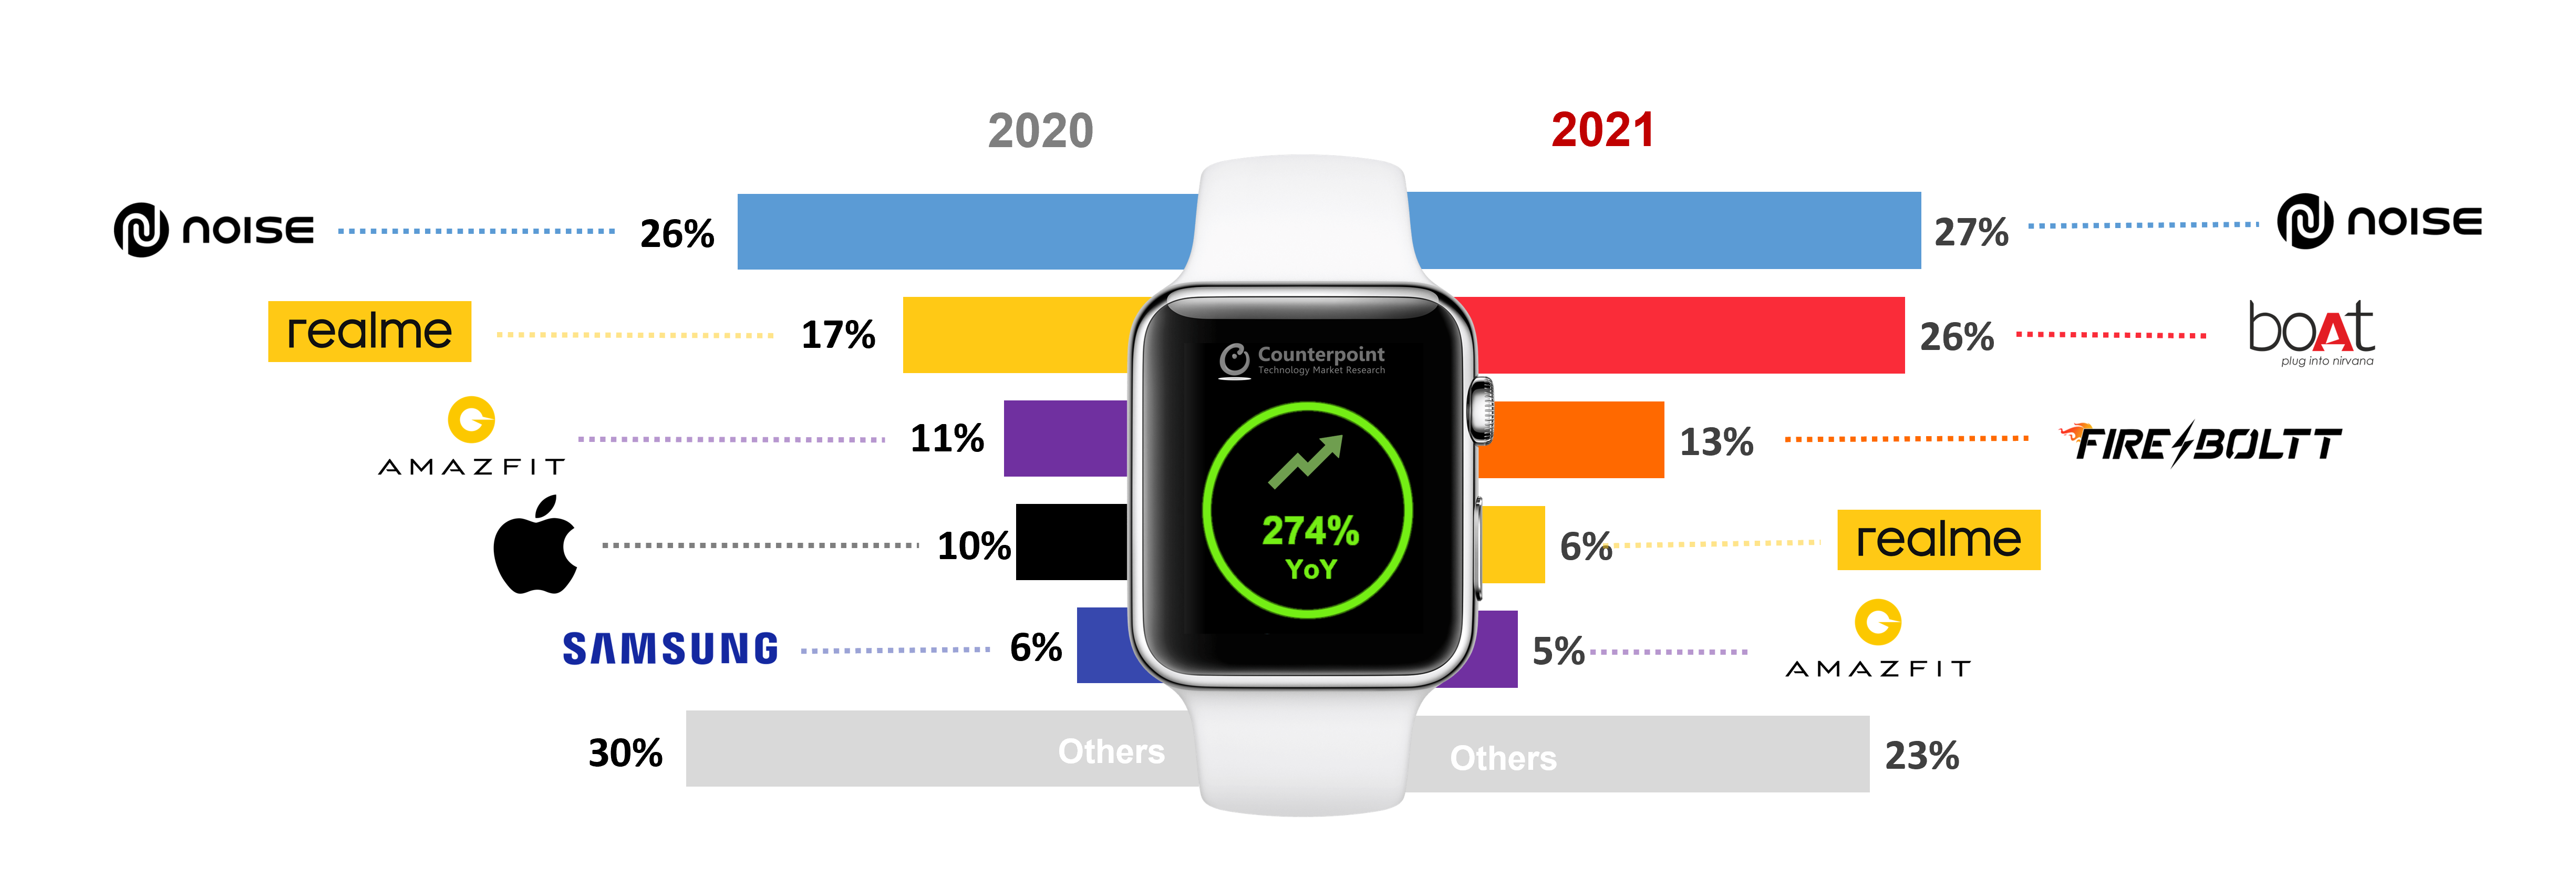 India Smartwatch Market Share of Top 5 Brands, 2021 vs 2020